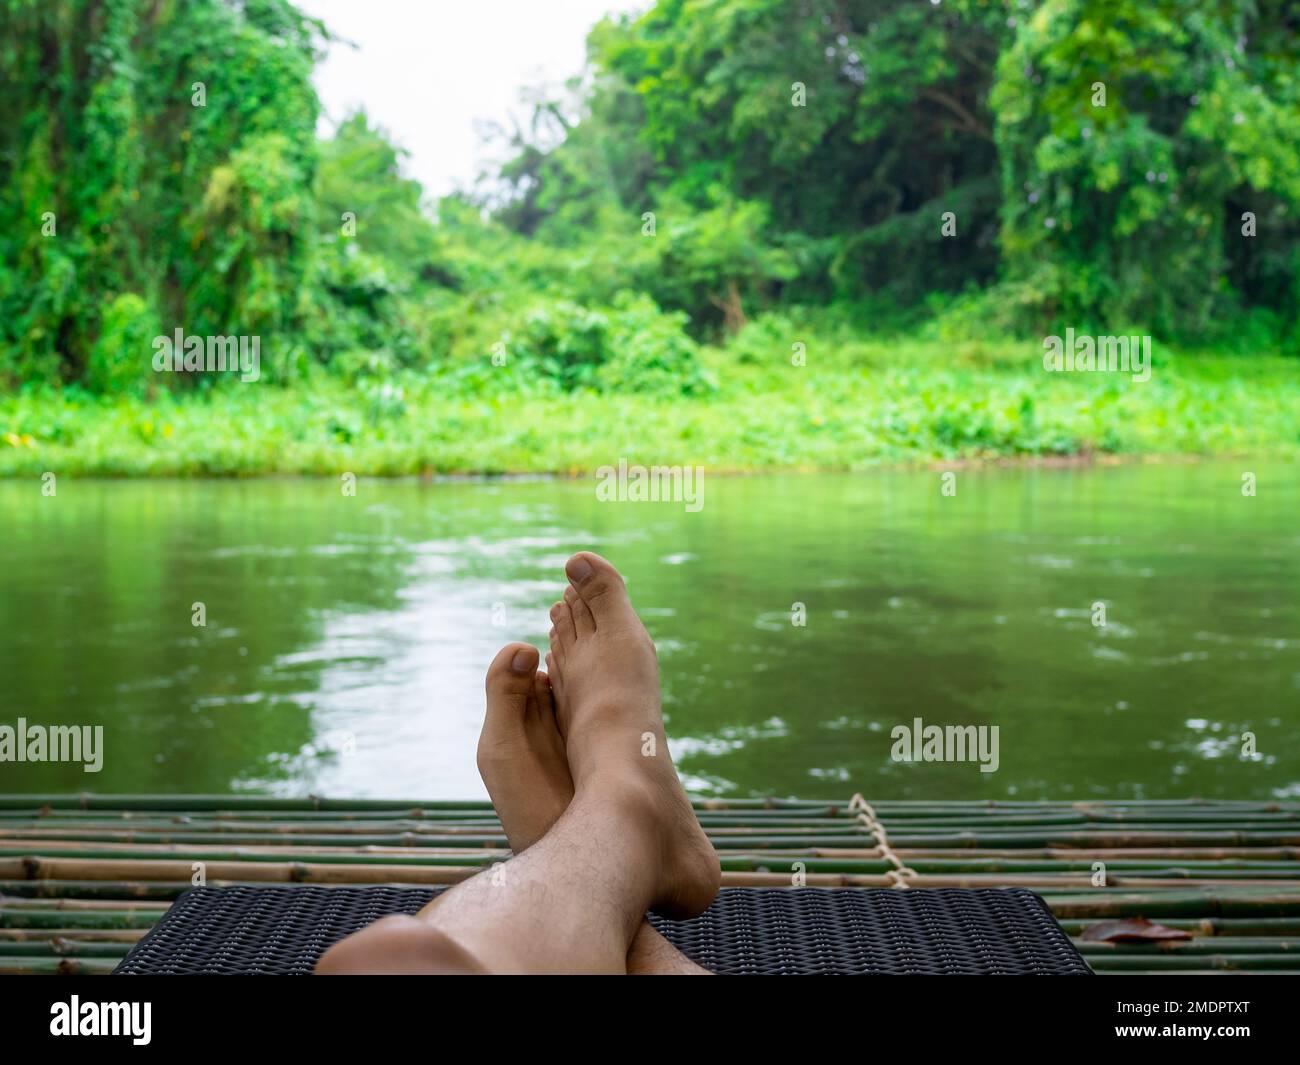 Take a break with relaxing time. The crossed feet of a person resting on a sunbed on a bamboo raft, watching streams in the calm peaceful green forest Stock Photo